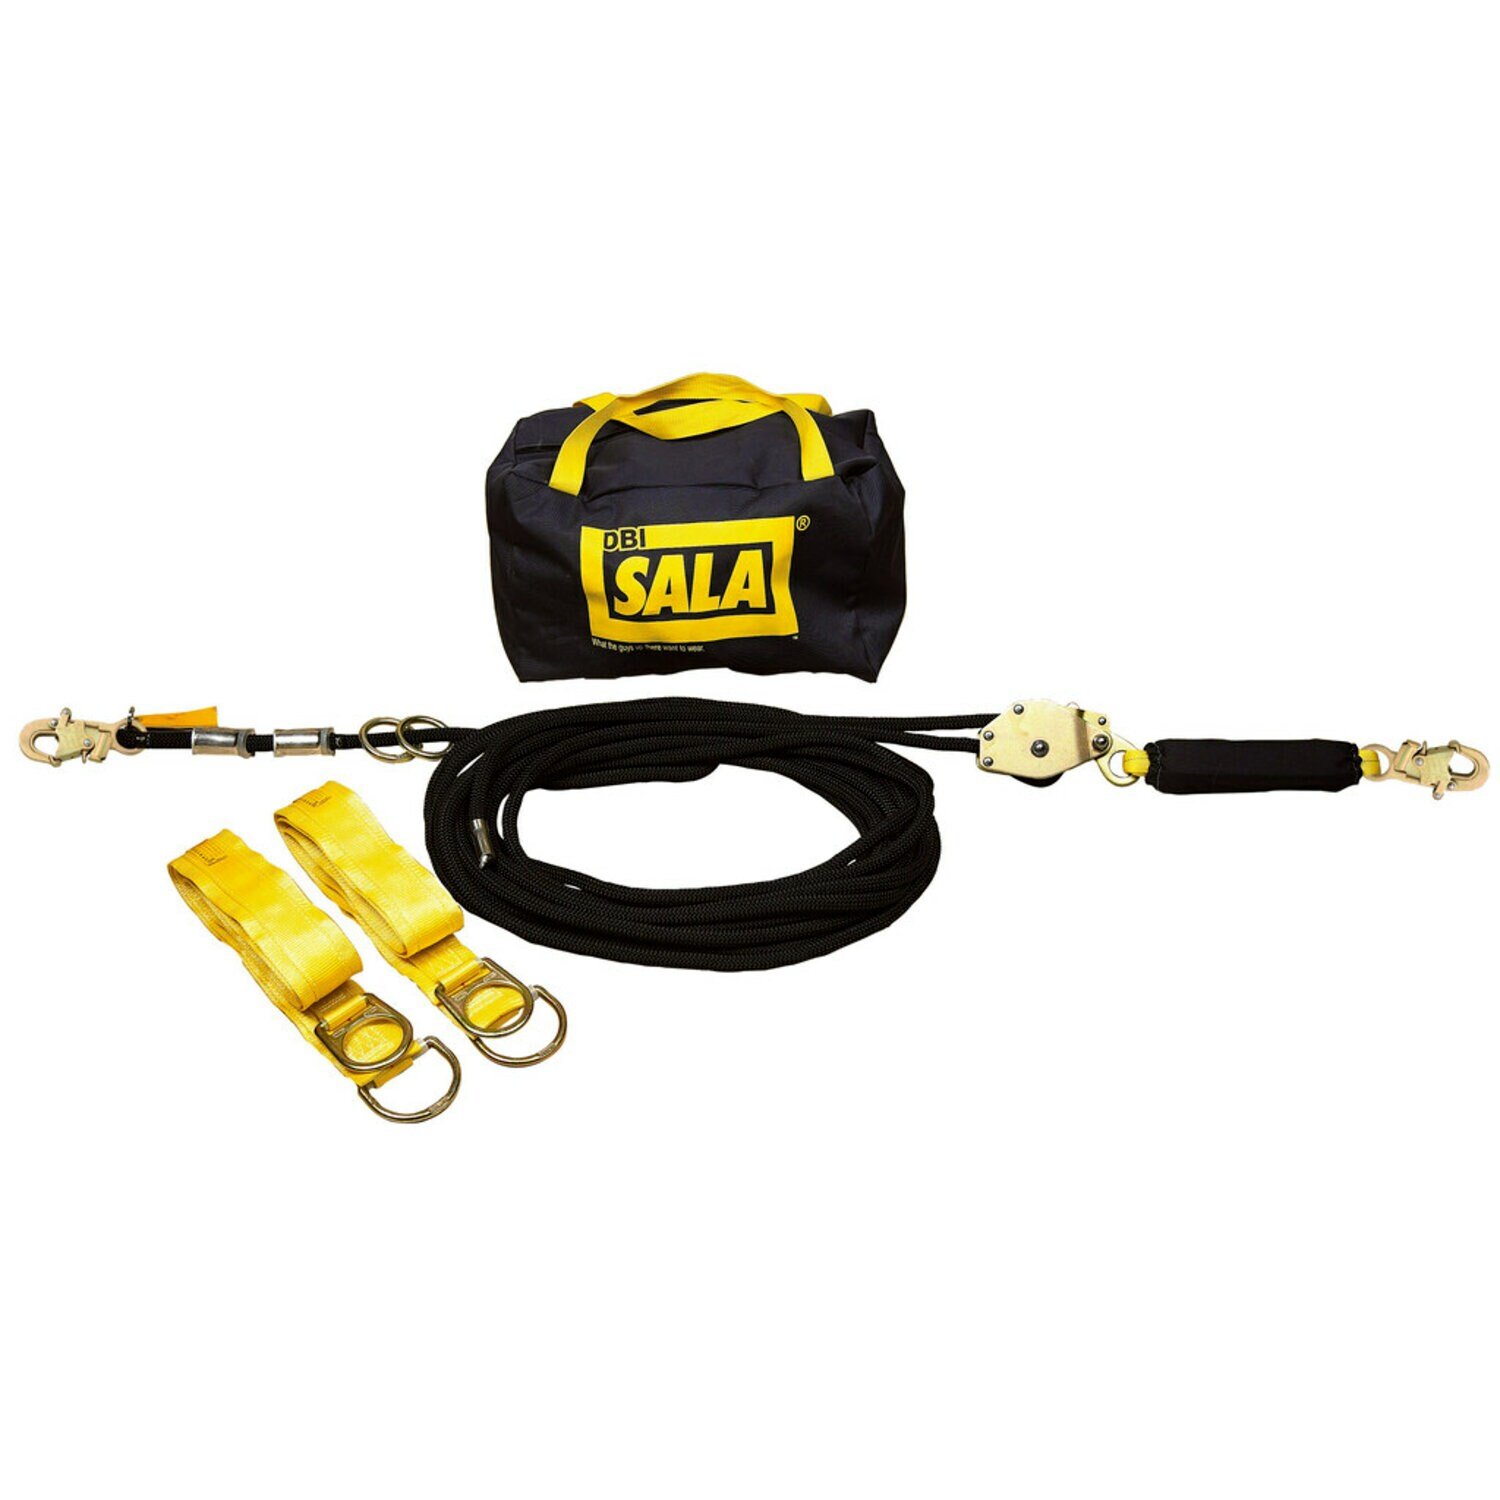 7012820307 - 3M DBI-SALA Temporary Horizontal Lifeline System with Anchors 7600705, 11/16 in Nylon Kernmantle Rope, 60 ft